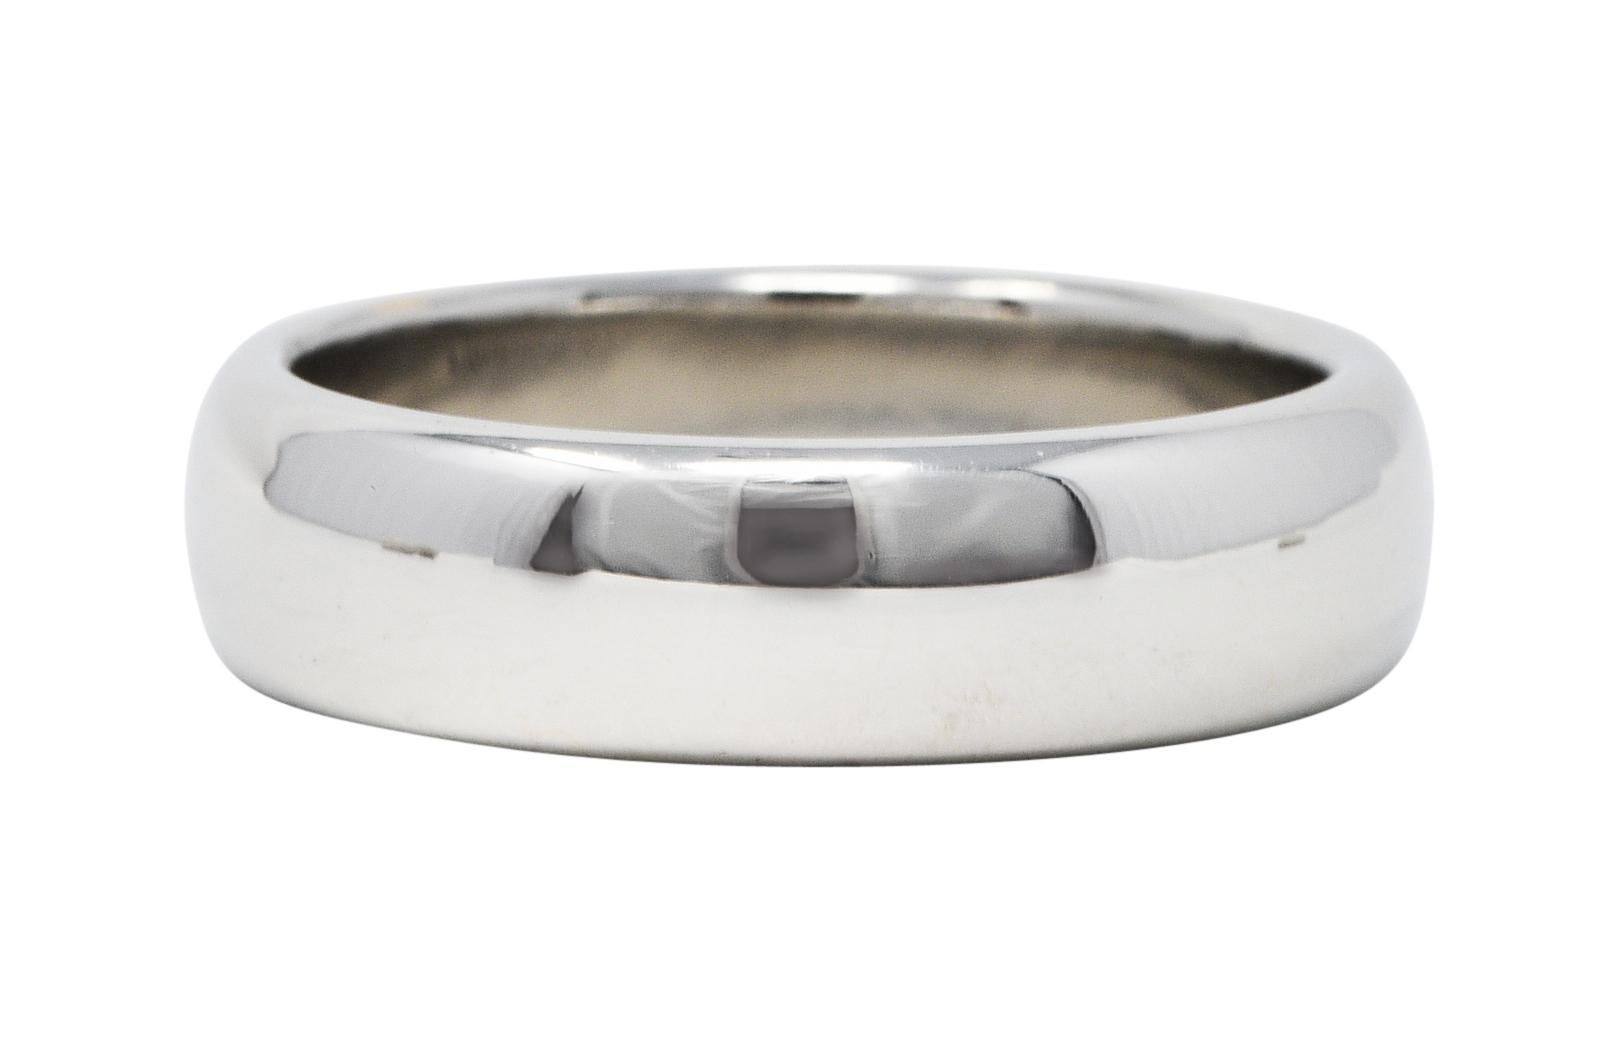 Band ring is designed with a rounded curvature

With a bright polish

Stamped PT950 for Platinum

Fully signed Tiffany & Co.

Circa: 1999

Ring Size: 9 & sizable

Measures North to South 6.0 mm and sits 2.0 mm high

Total weight: 14.5 grams

Time.